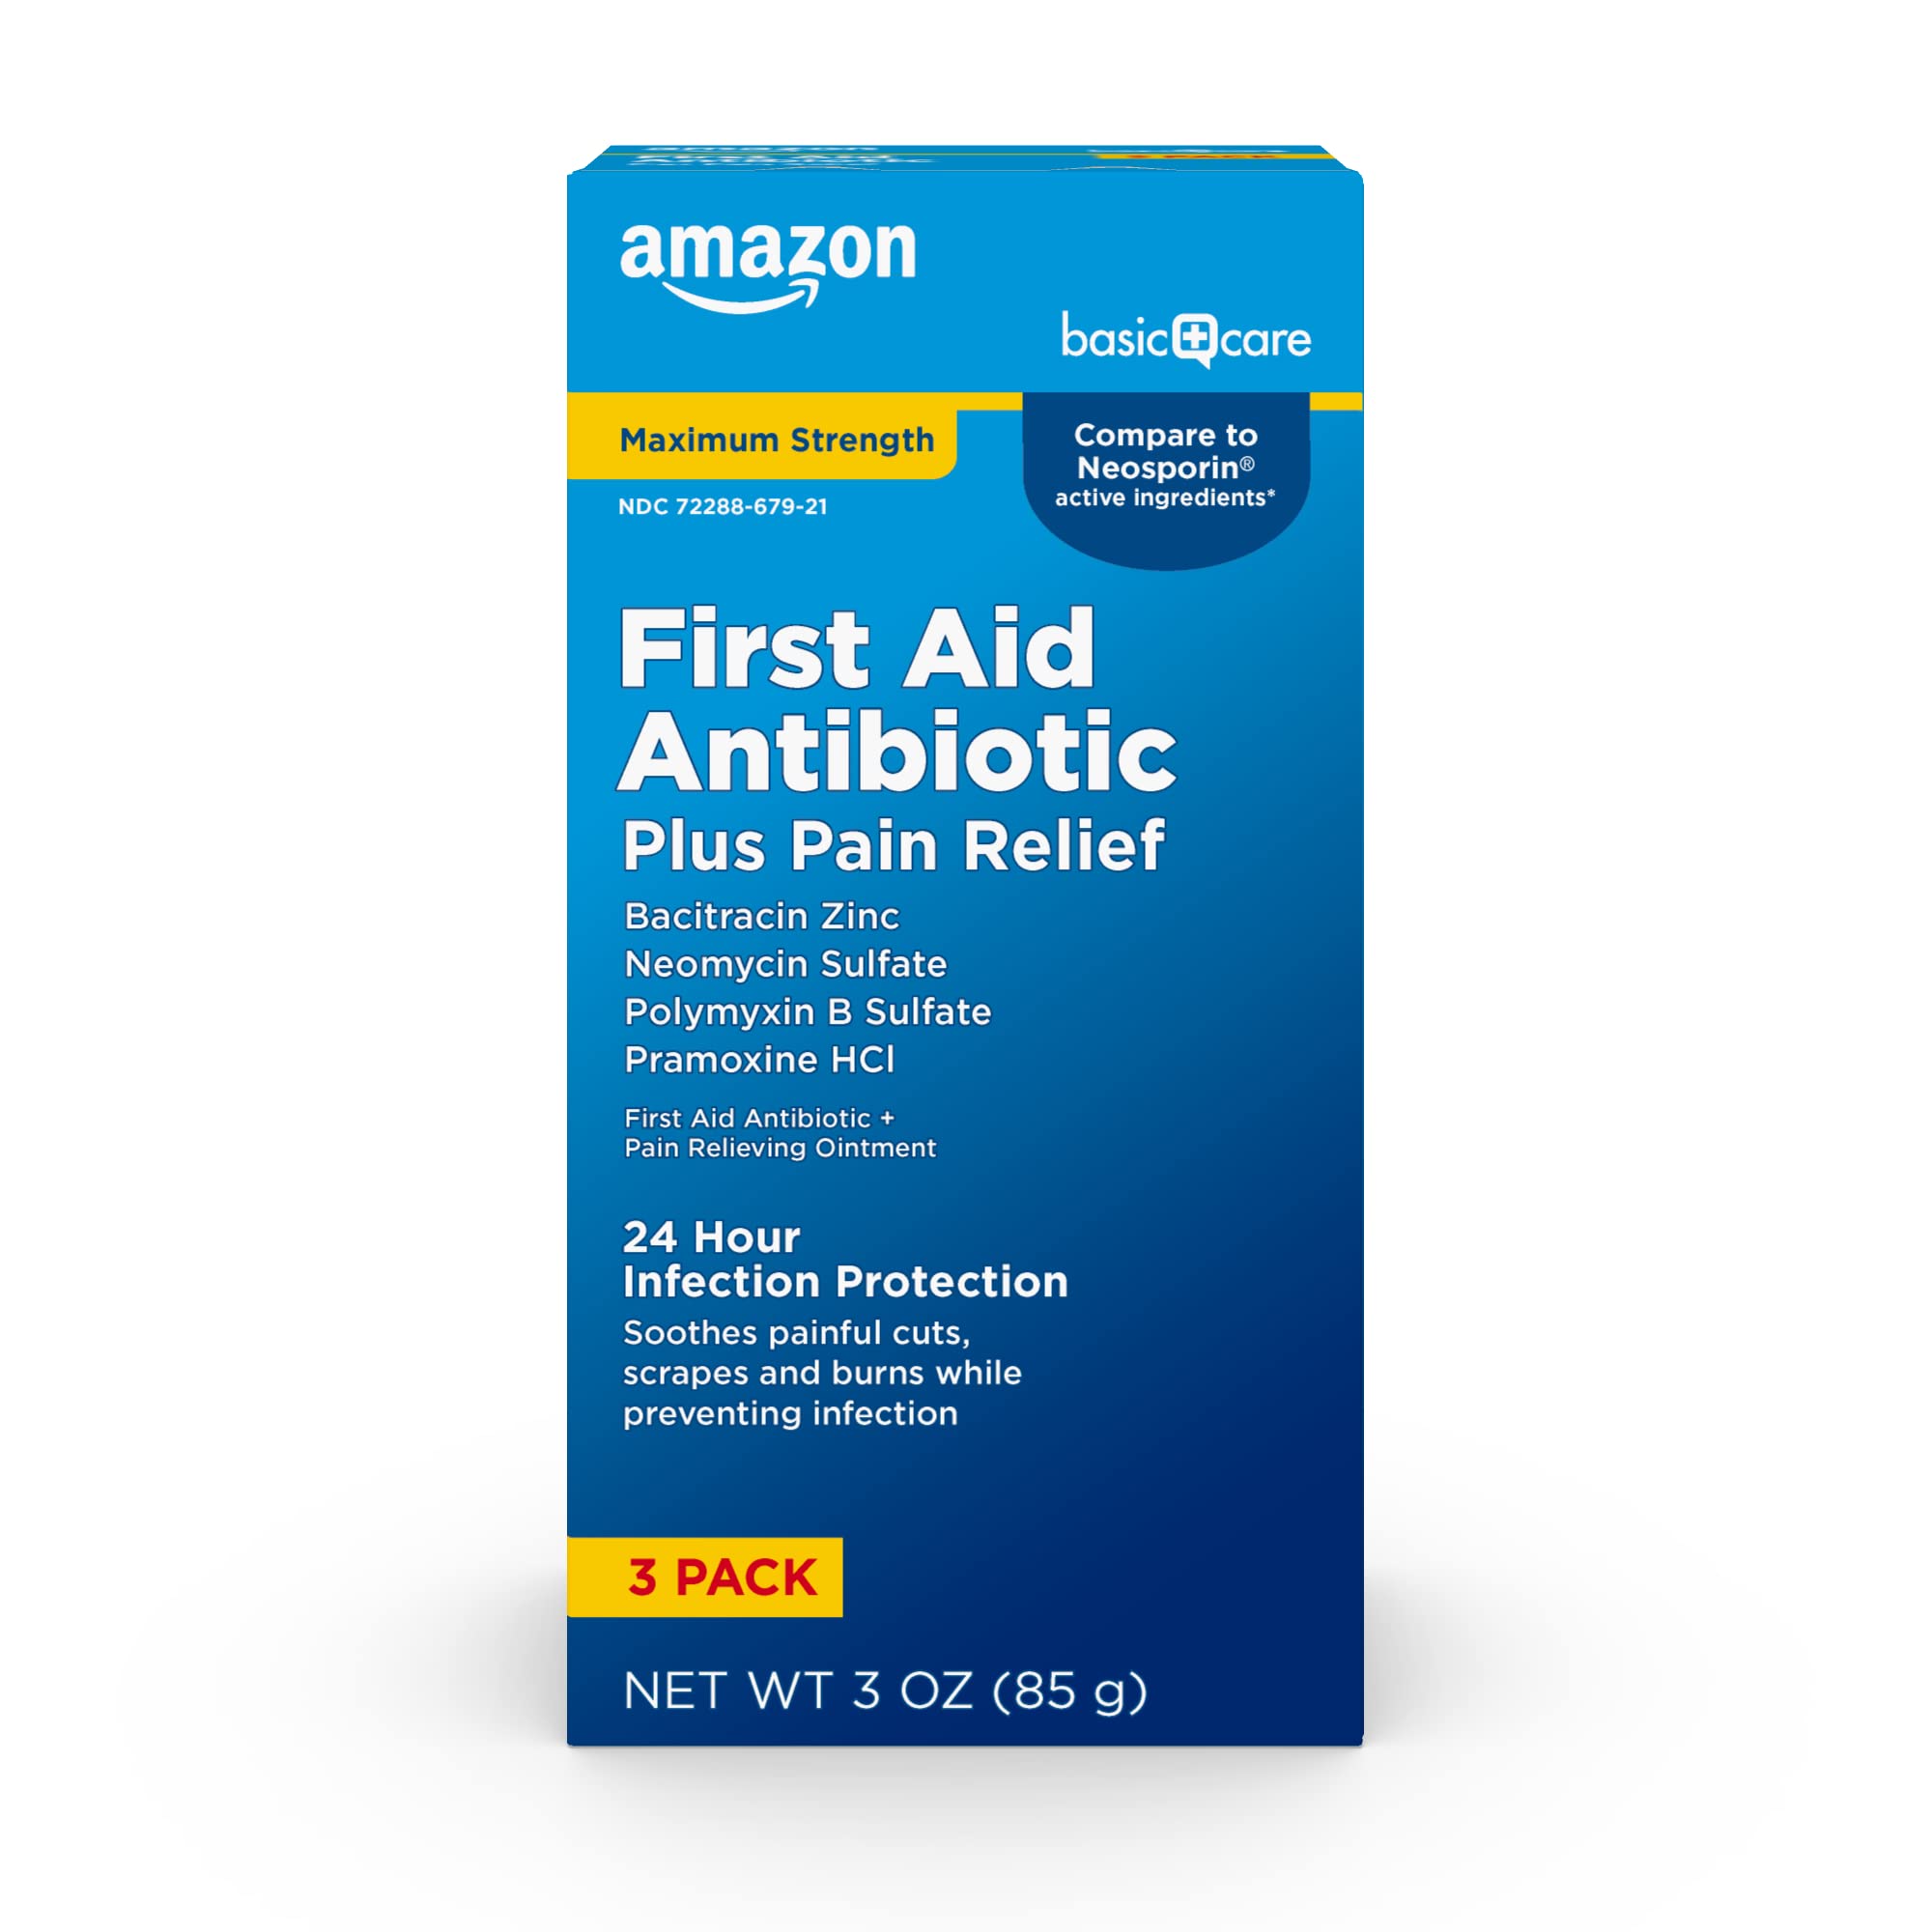 Amazon Basic Care Maximum Strength First Aid Triple Antibiotic Ointment, Pain Relief For Minor Cuts, Scrapes and Burns, 3 Ounces